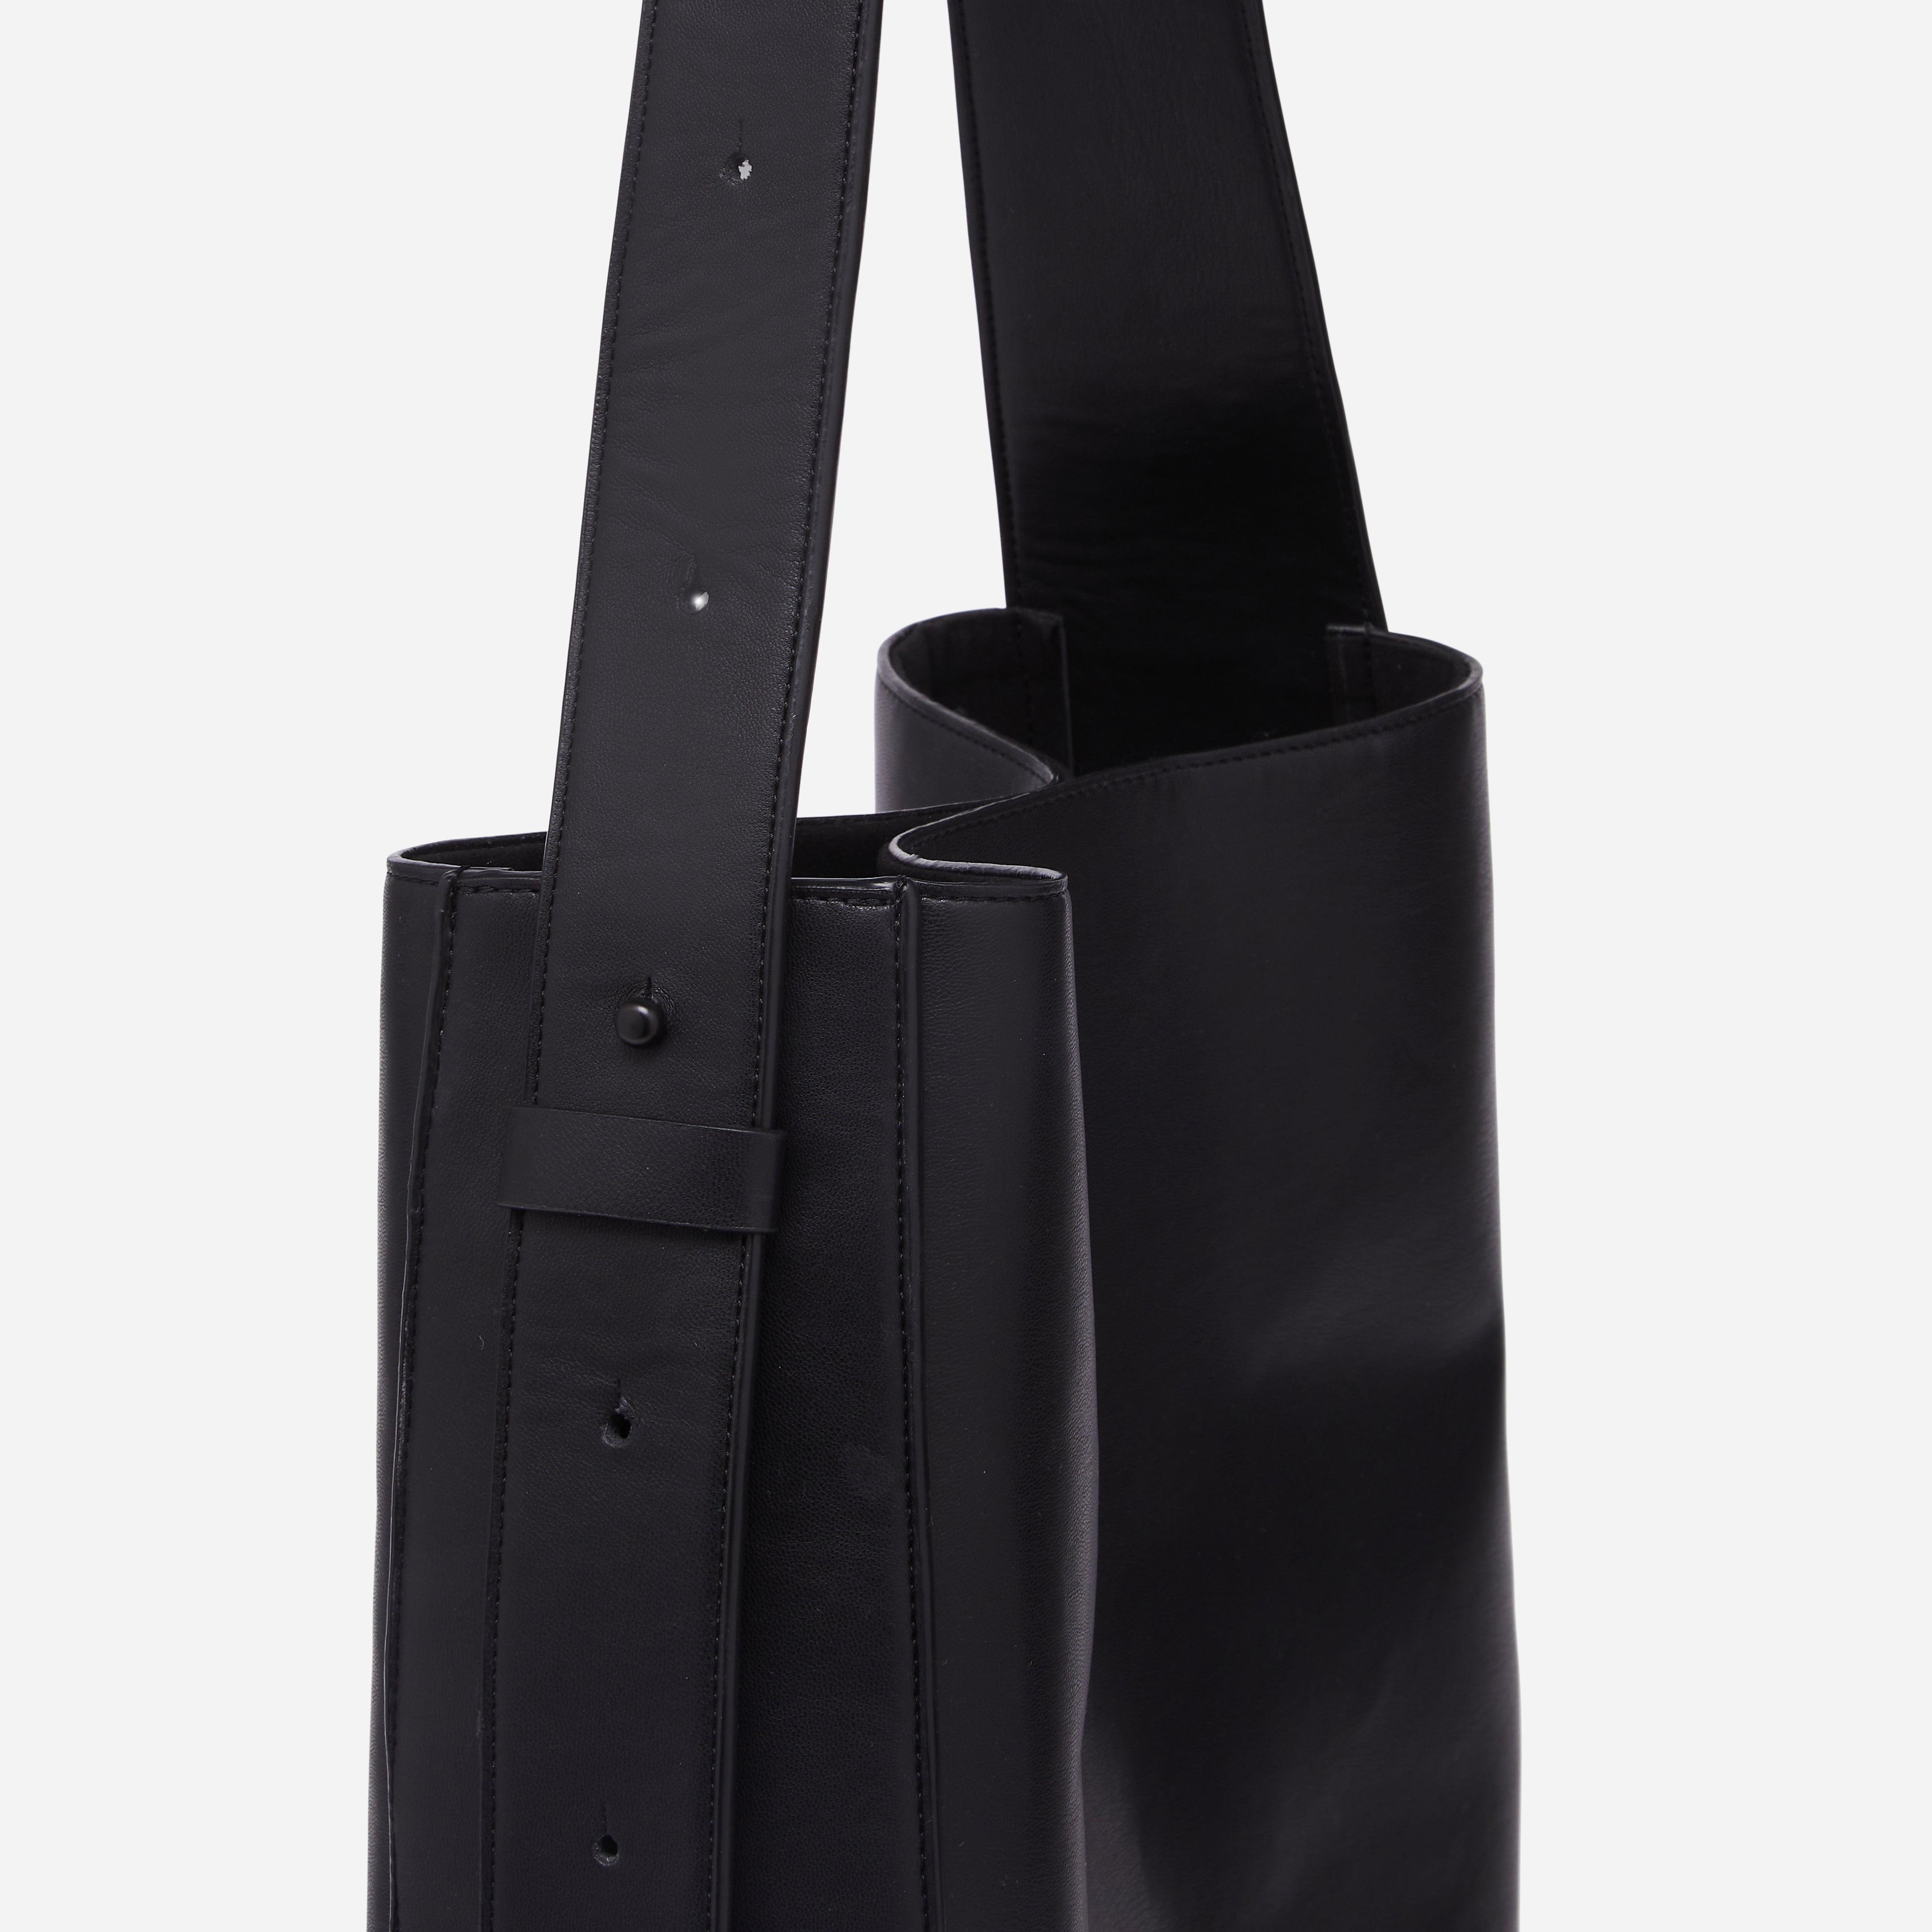 Rowe Tote in Black Onyx  side view of the adjustable strap